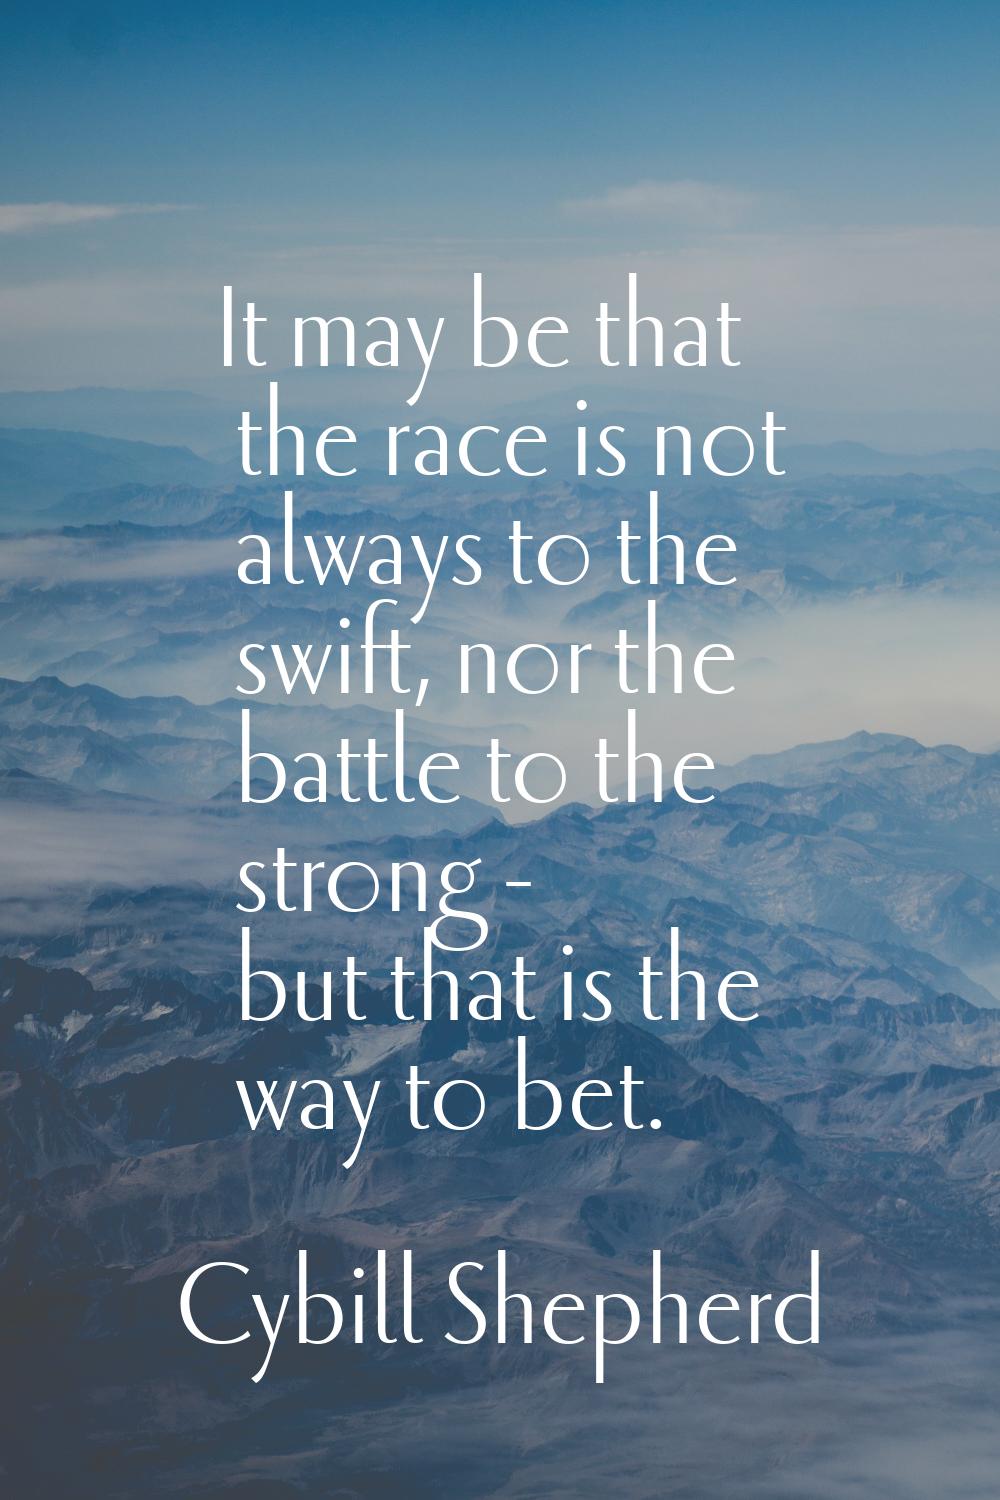 It may be that the race is not always to the swift, nor the battle to the strong - but that is the 